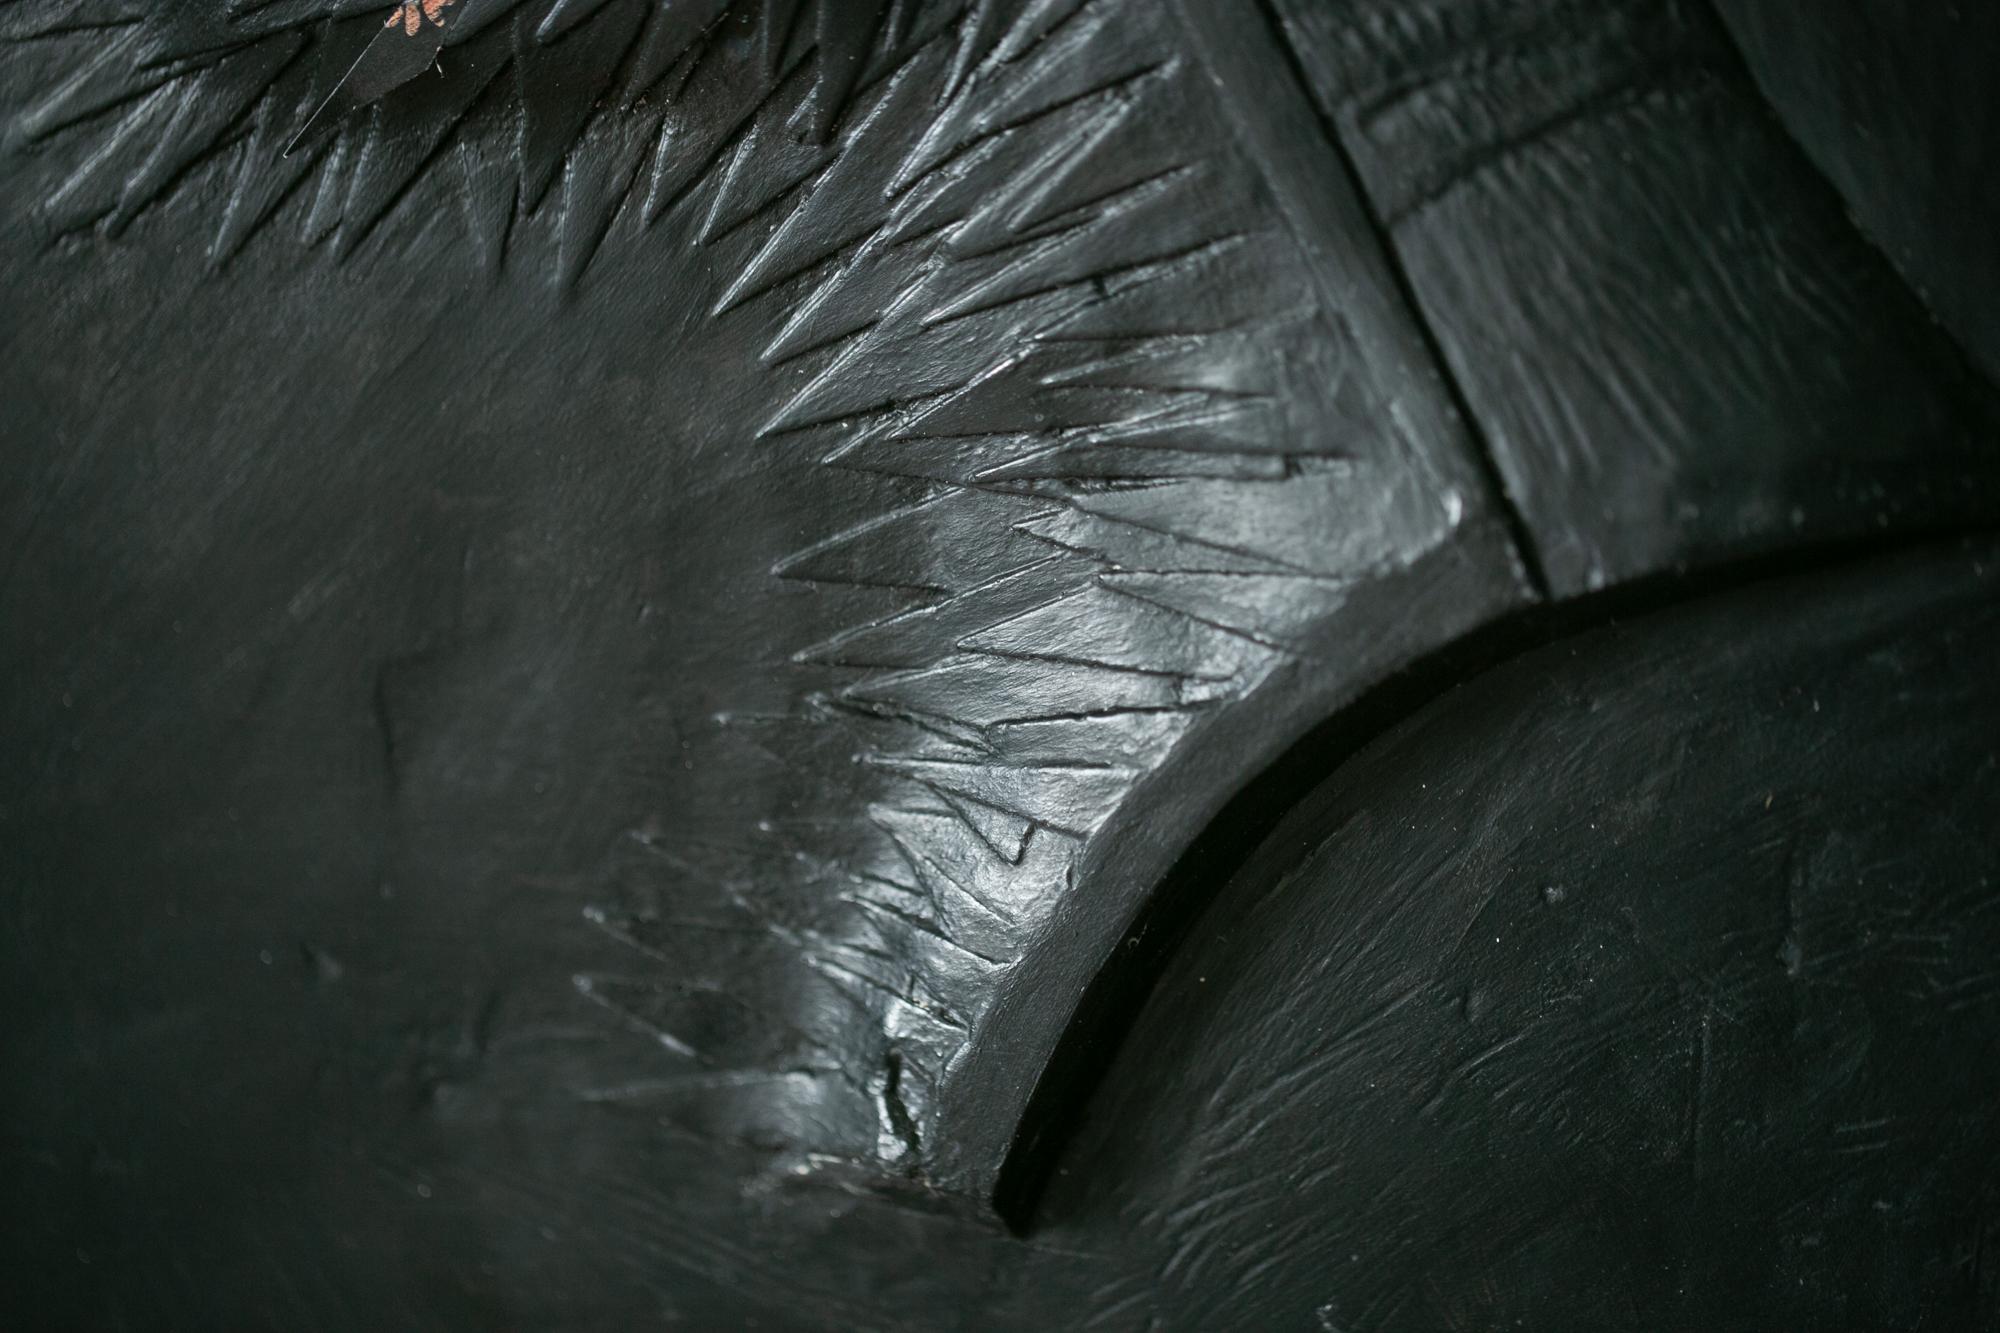 This black, figurative wall-hanging sculpture titled 